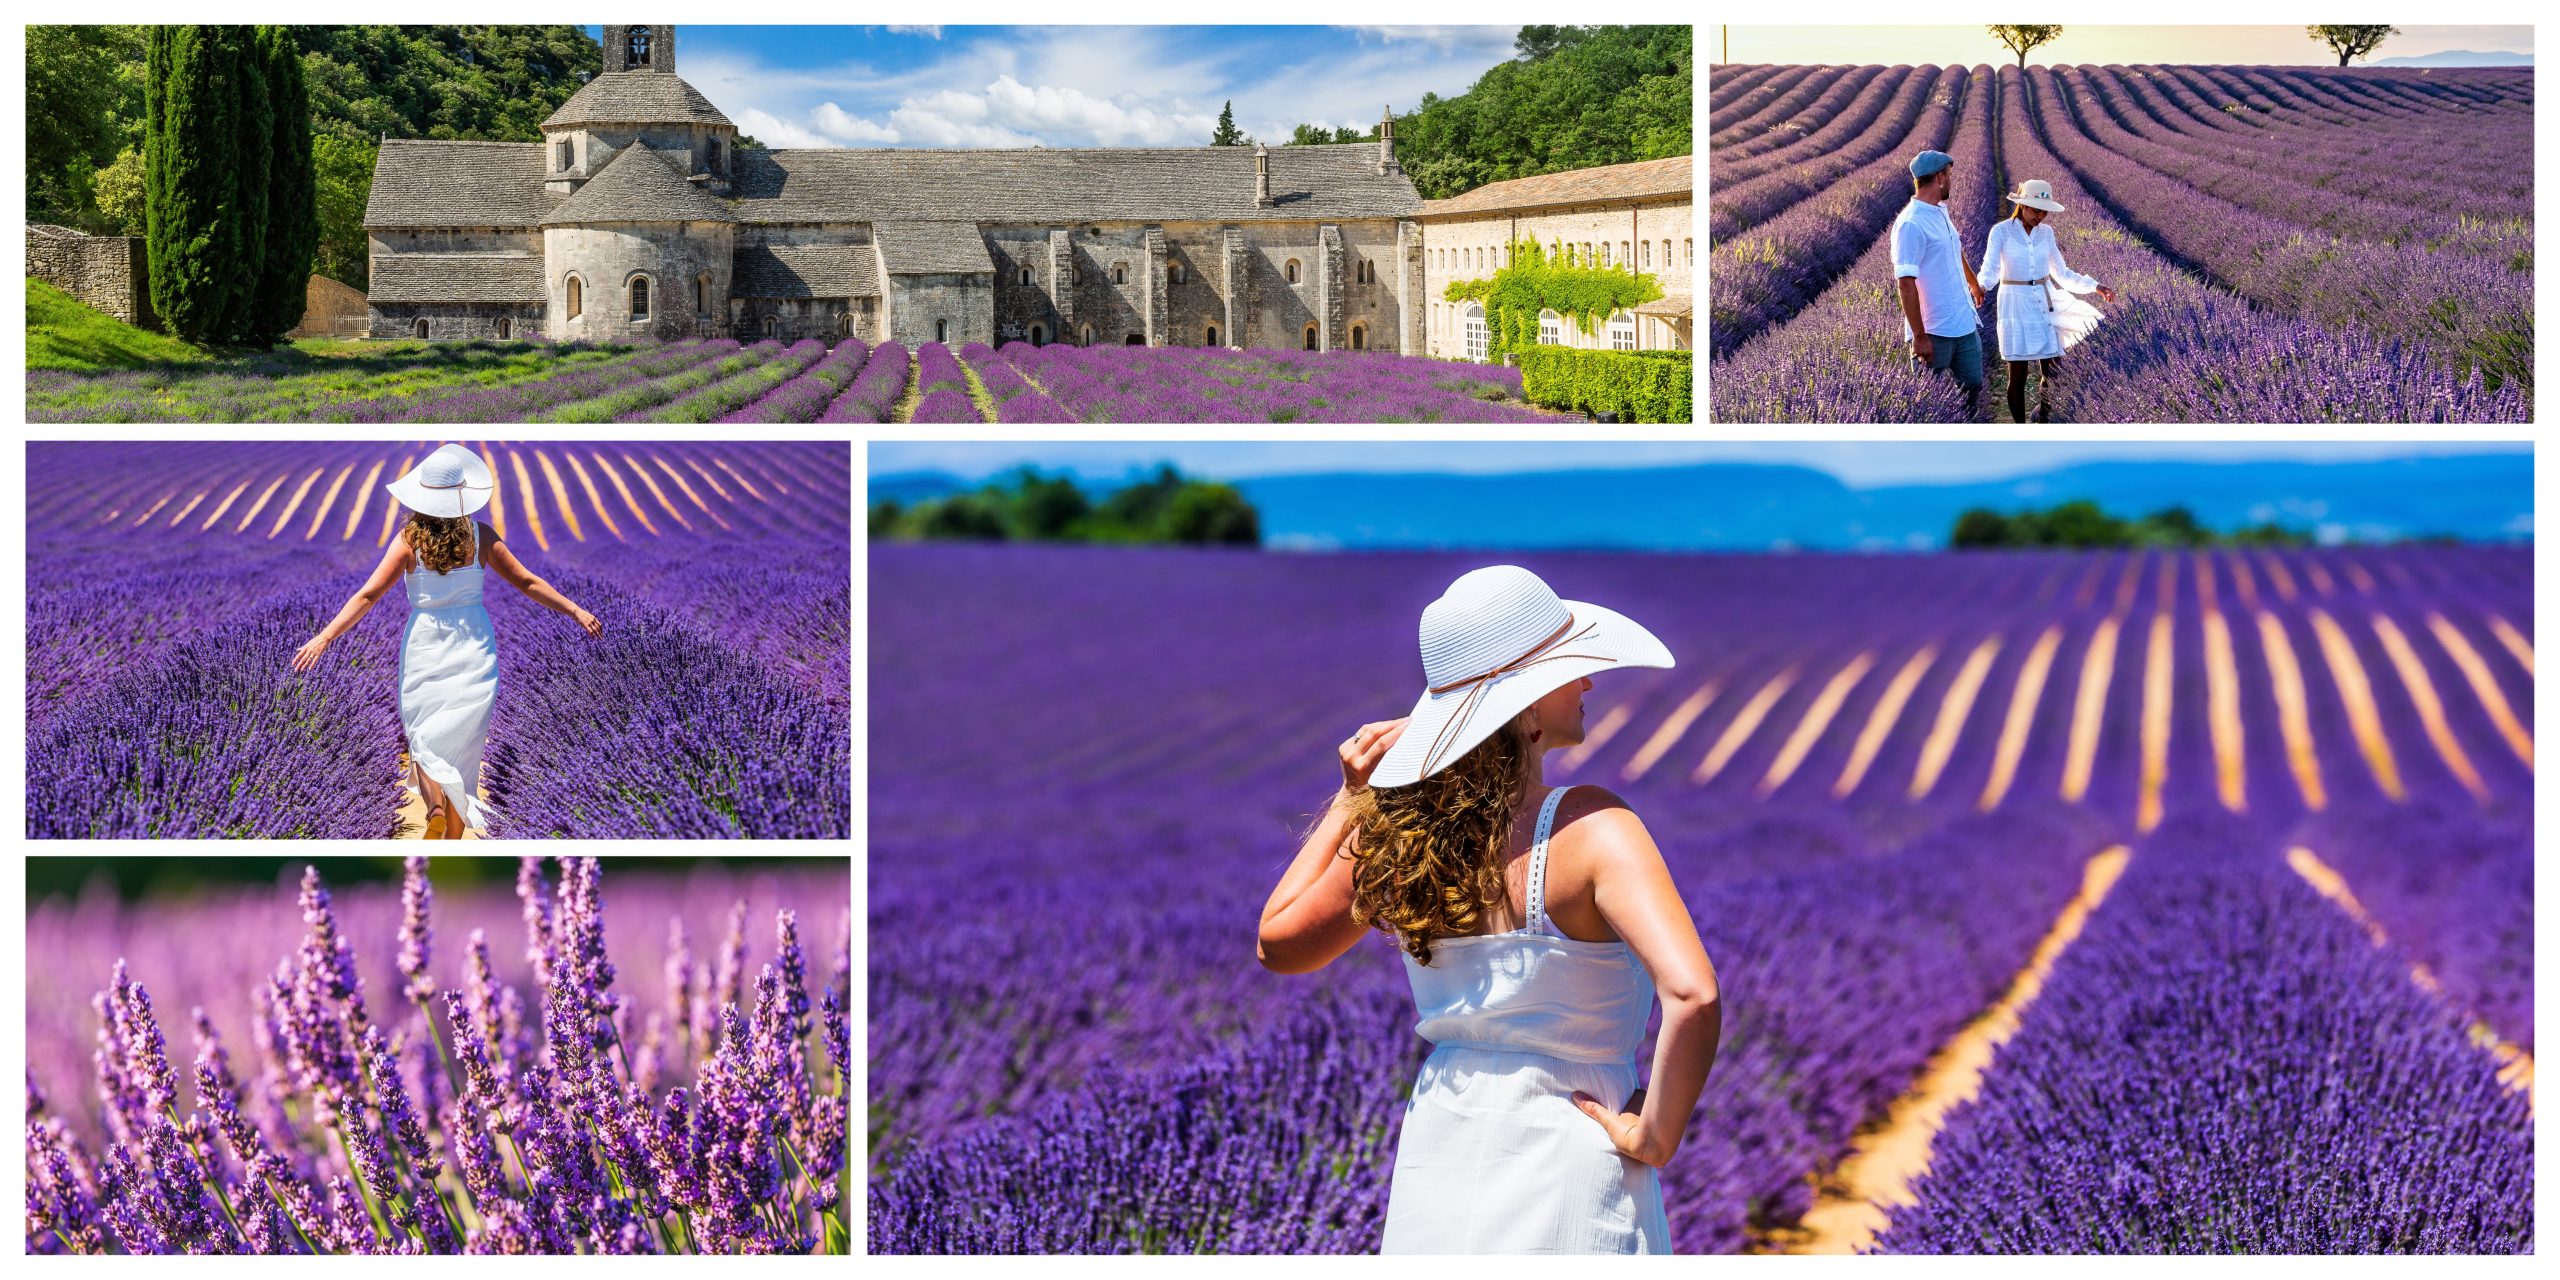 visit the lavender fields of France